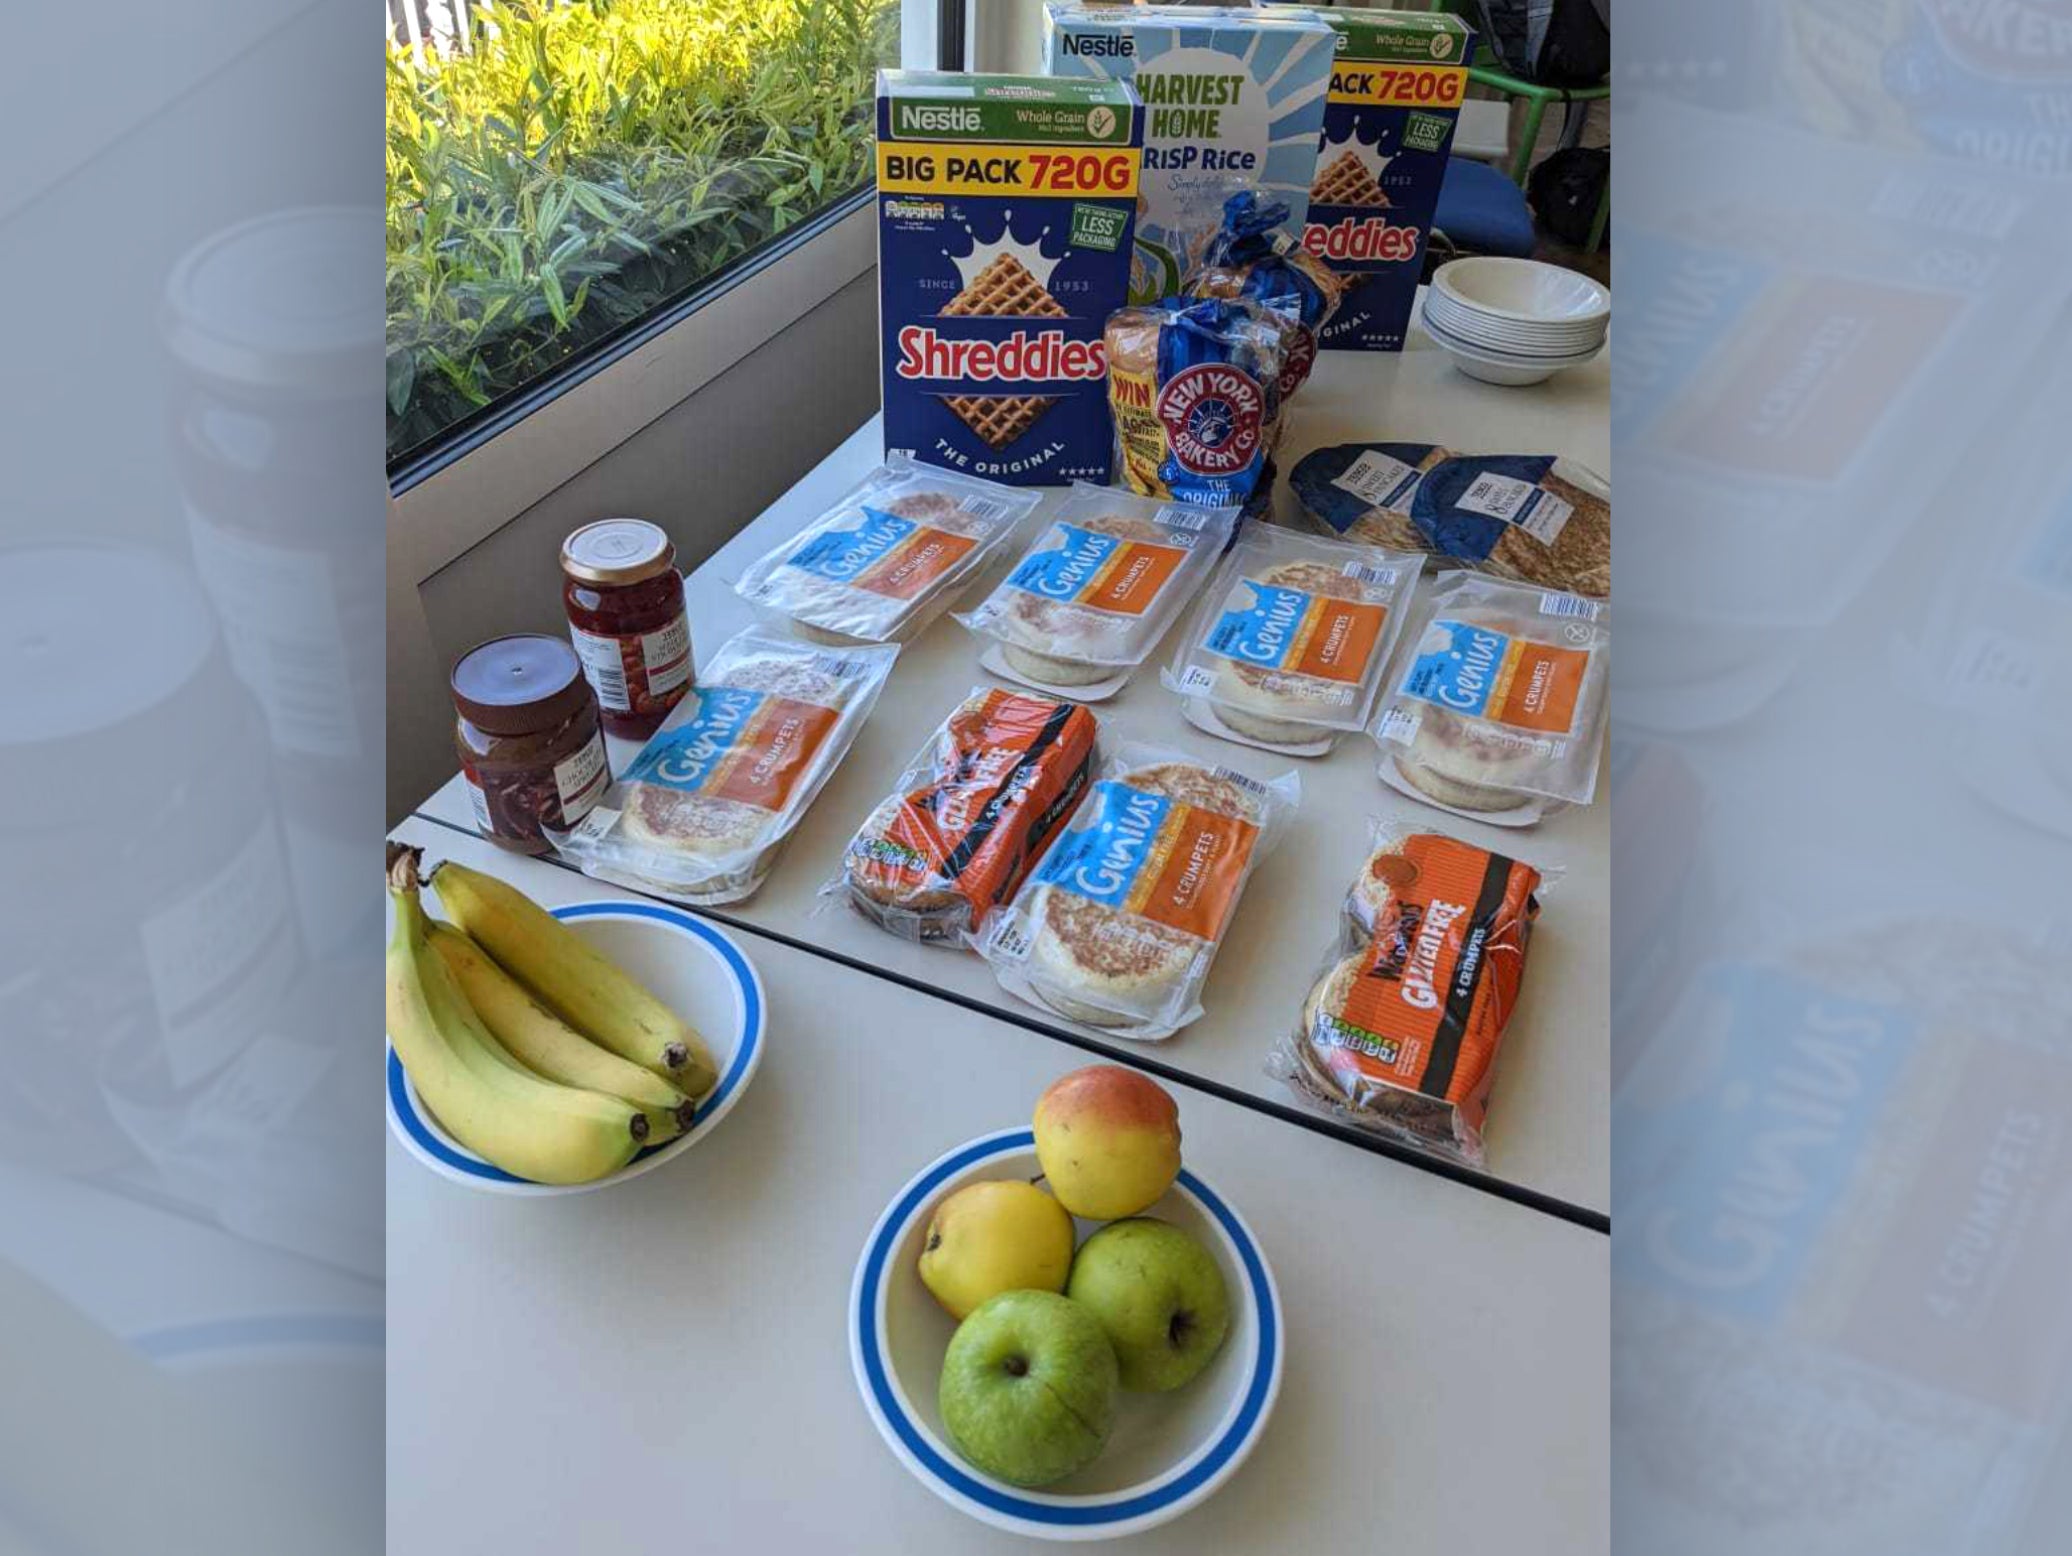 Adeyfield Academy has been putting on a free breakfast for all students before exams